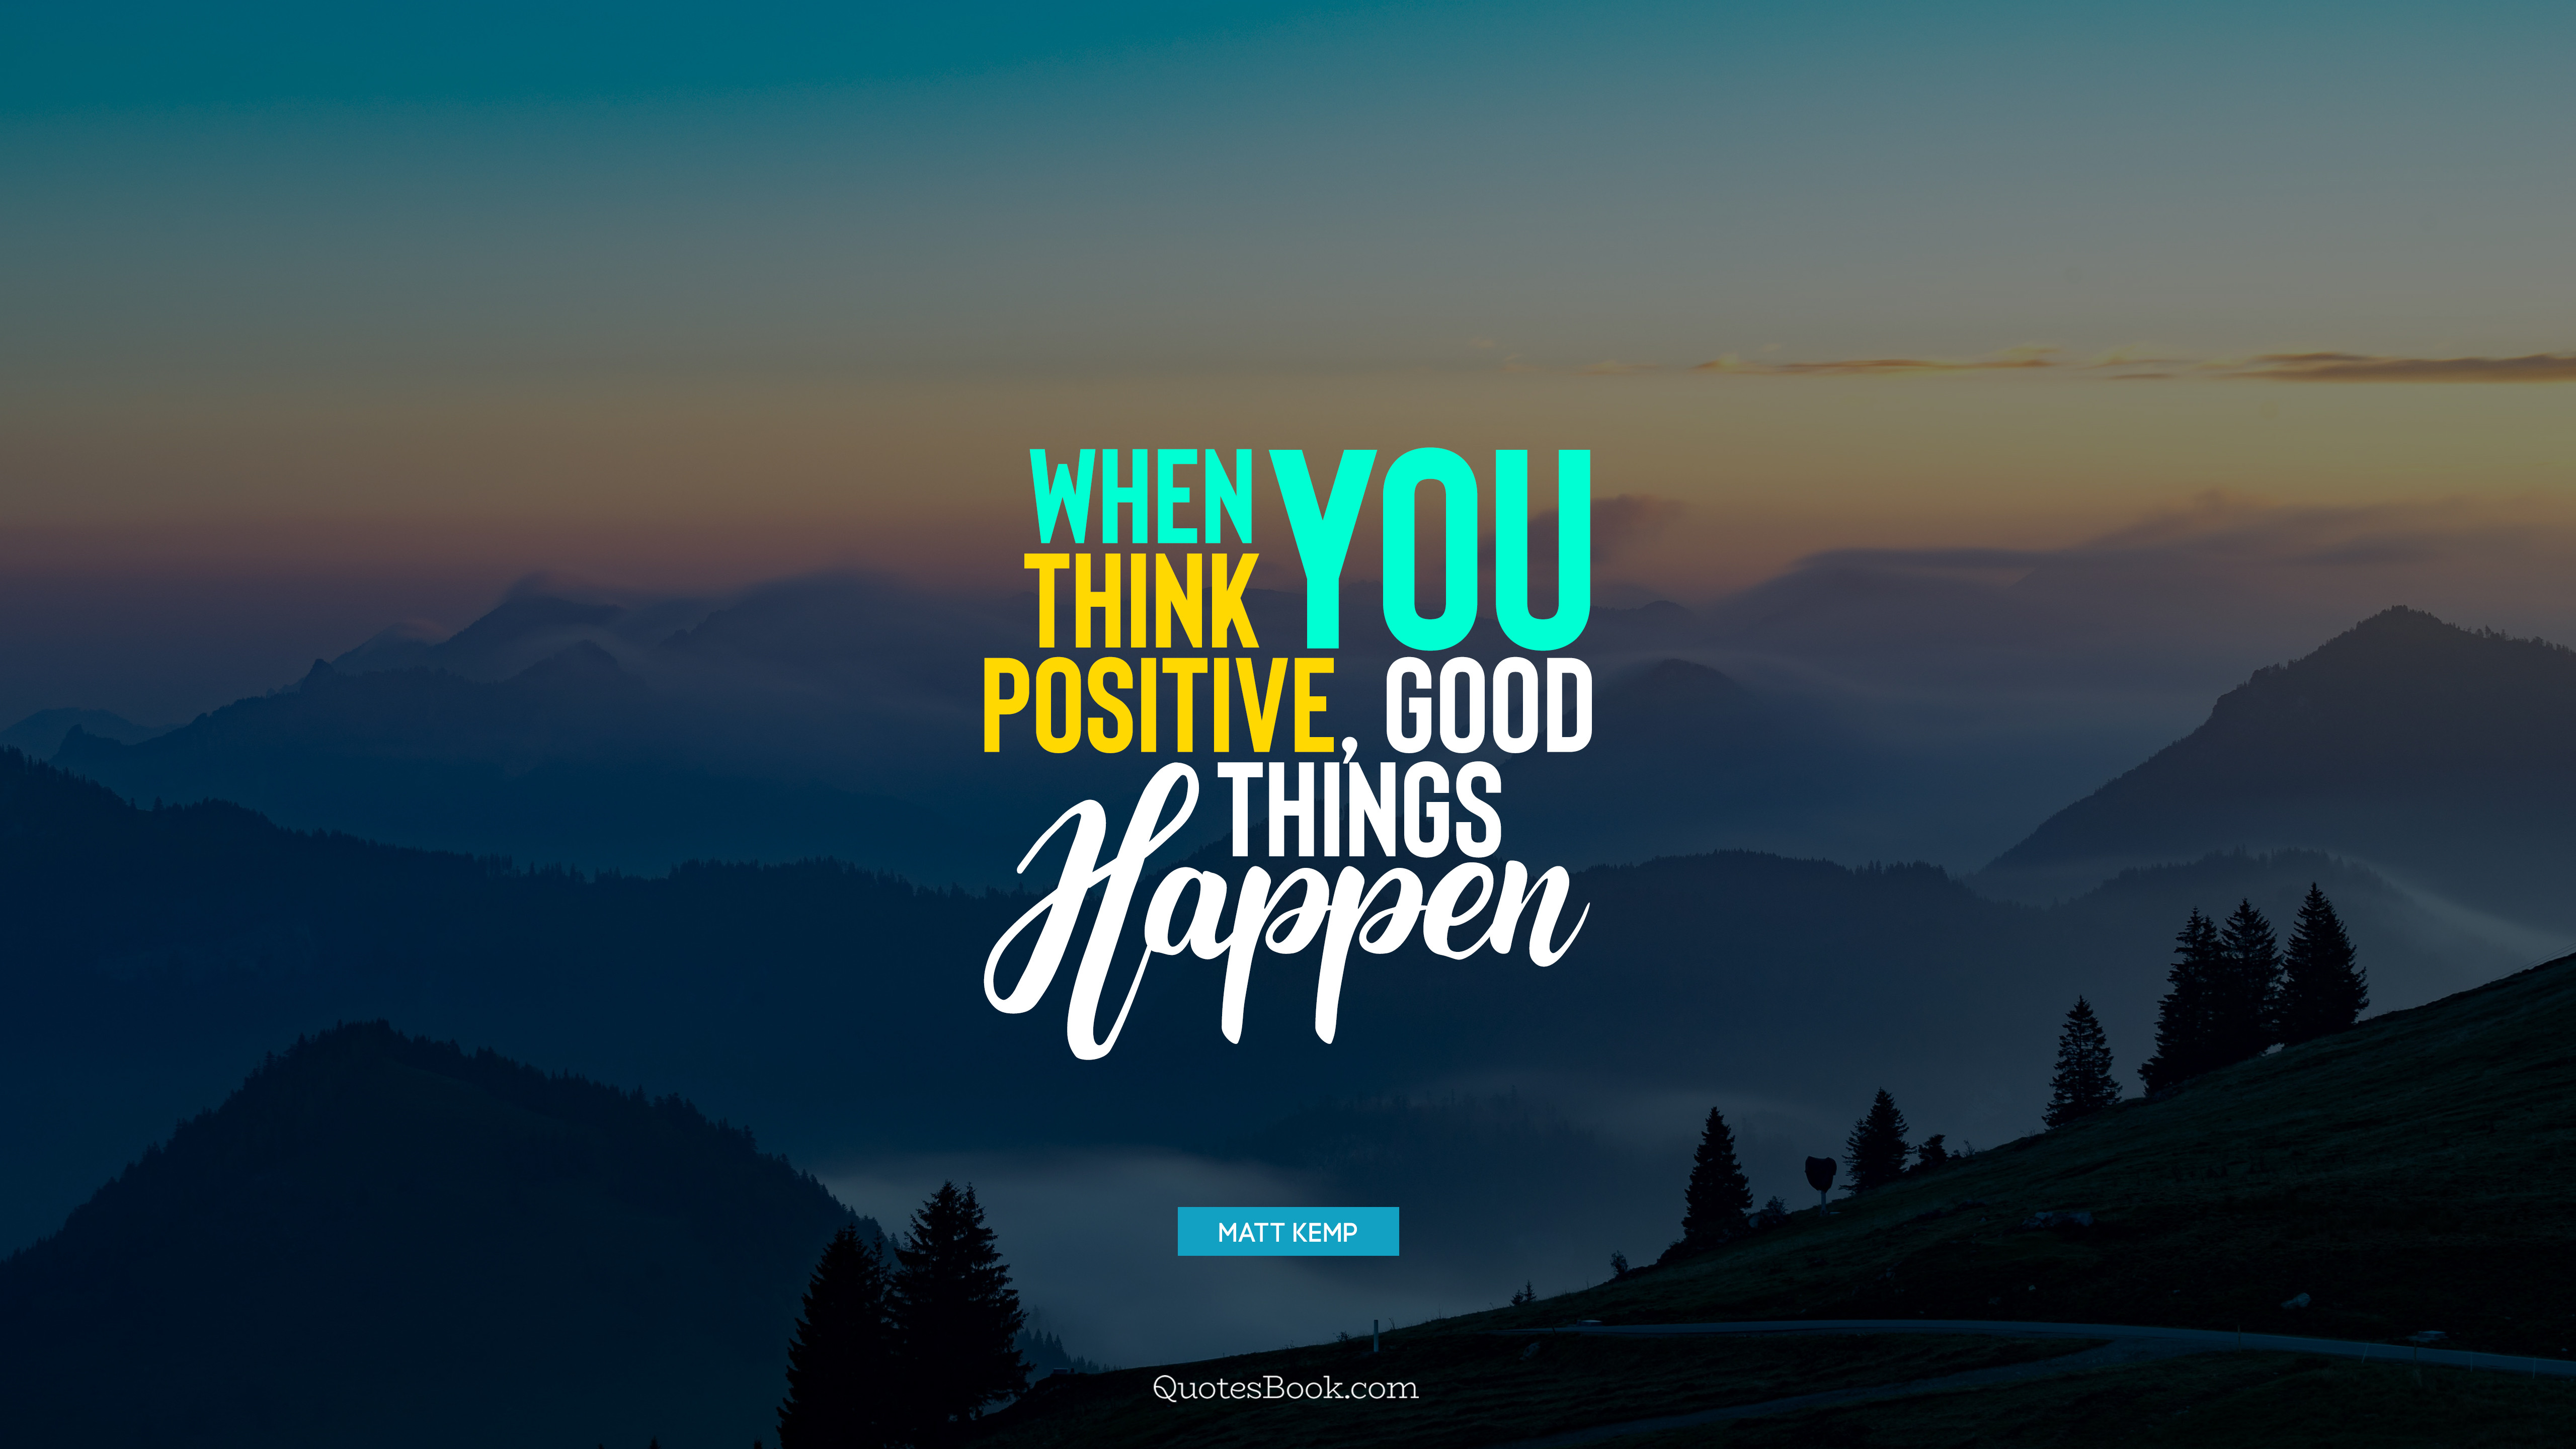 when you think positive good things happen 5120x2880 4800